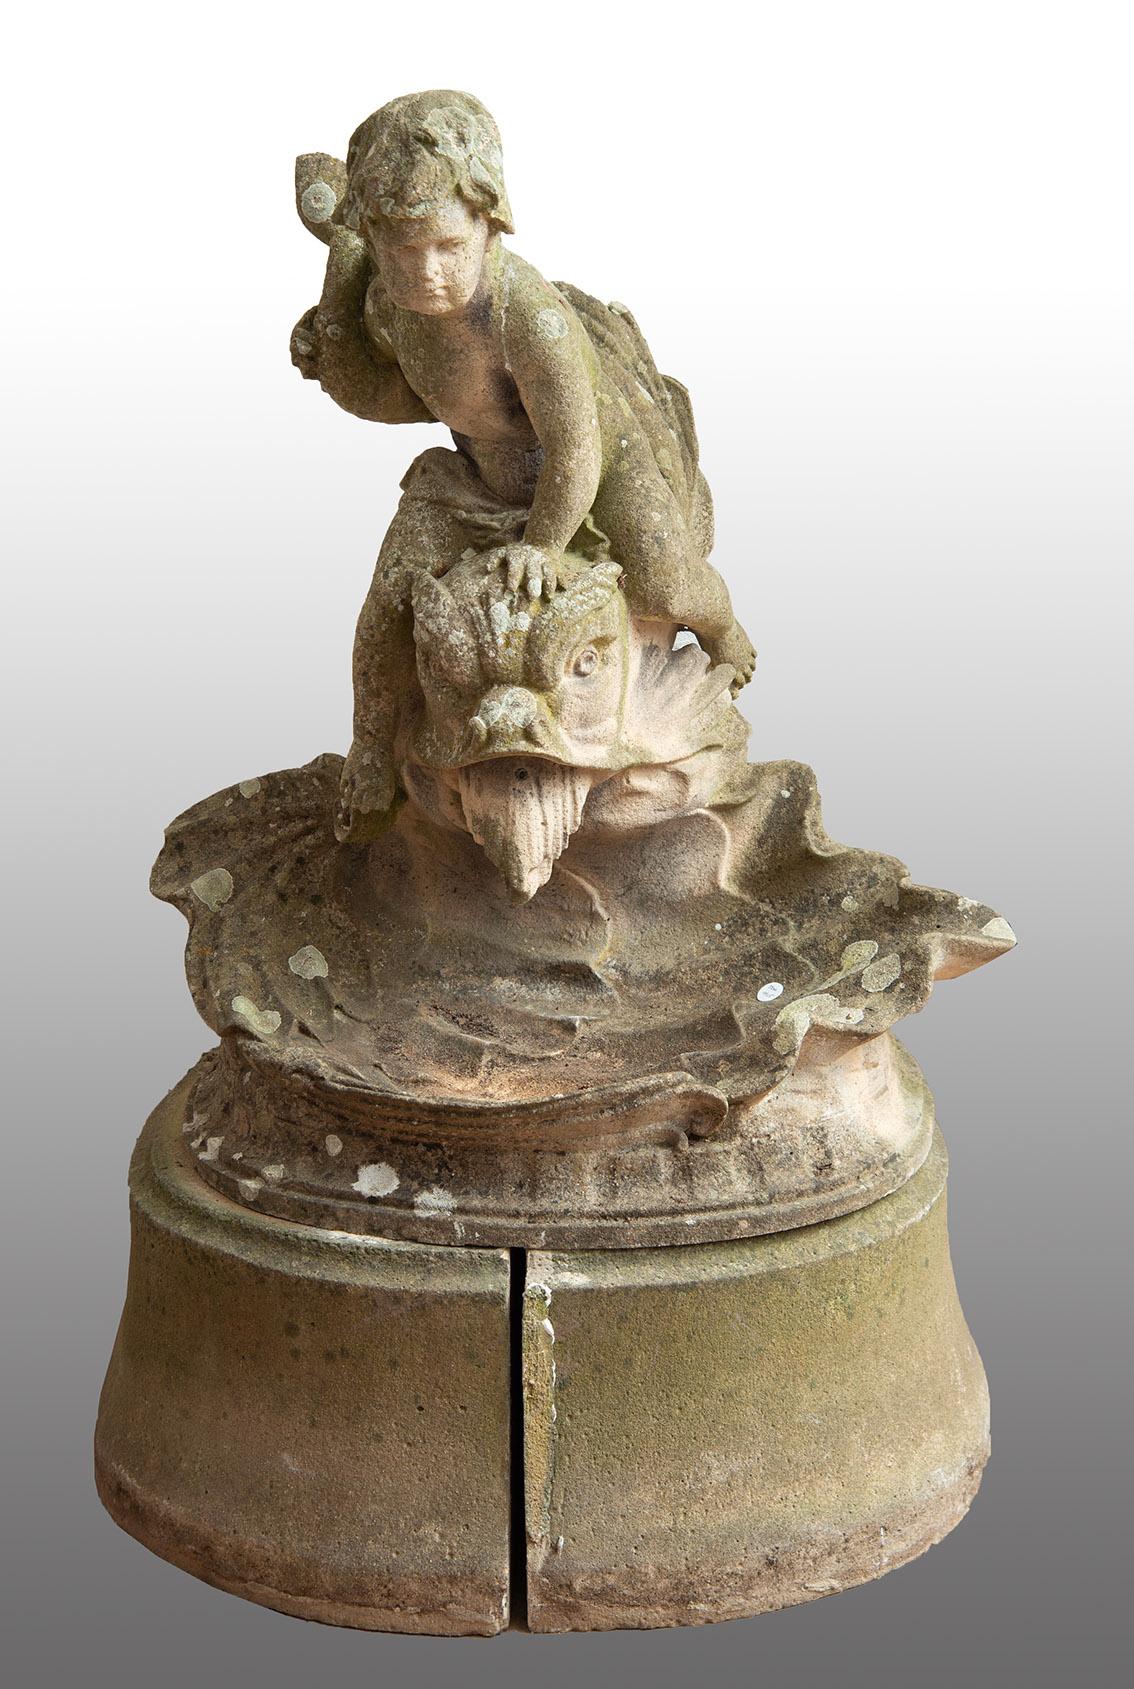 Unknown Figurative Sculpture - Antique fountain made of Vicenza stone from the 19th century period.